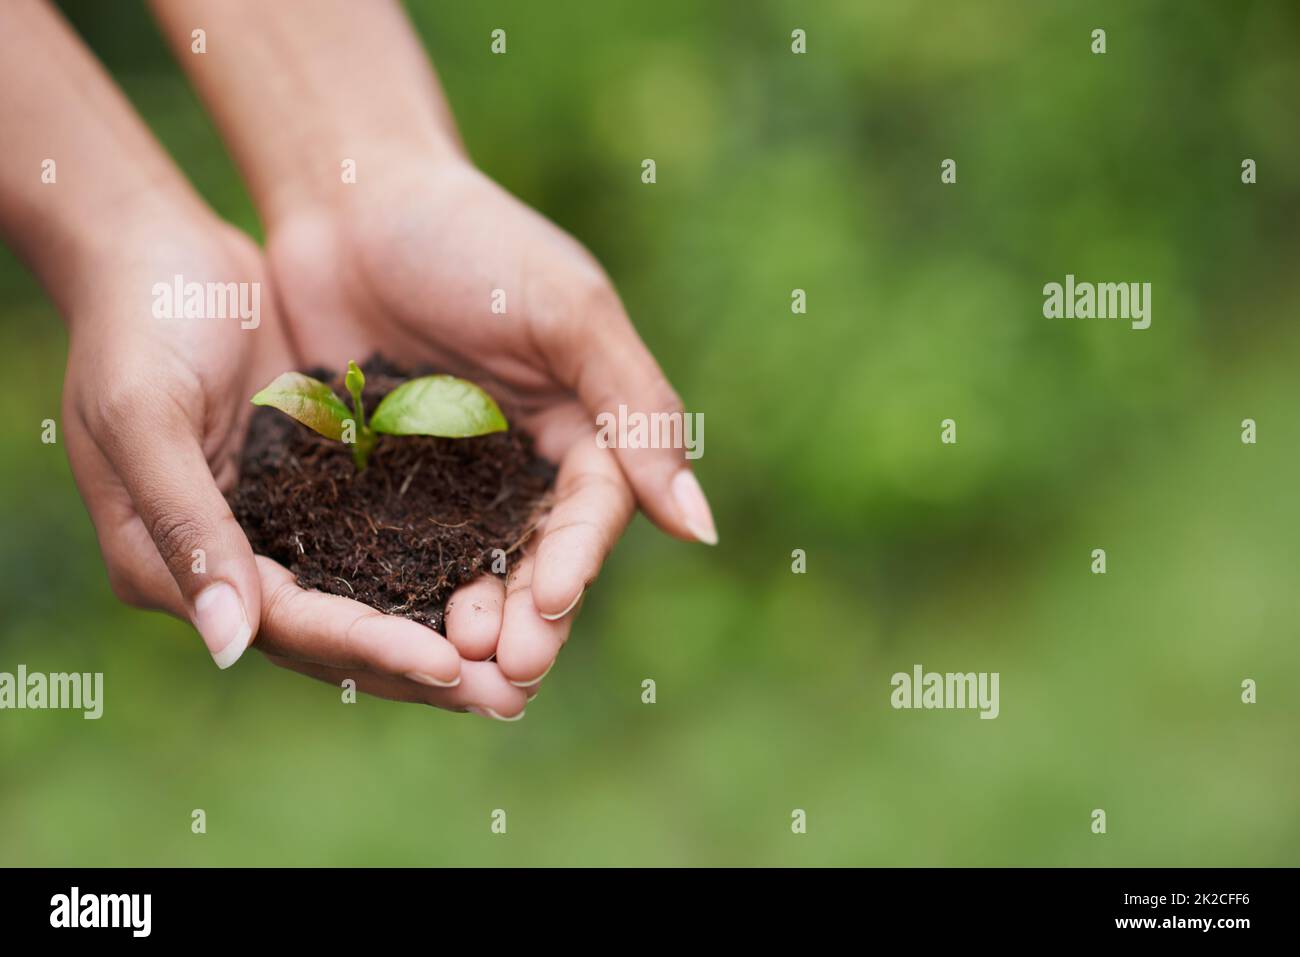 Caring for the future. Closeup shot of a womans hands holding a growing plant. Stock Photo